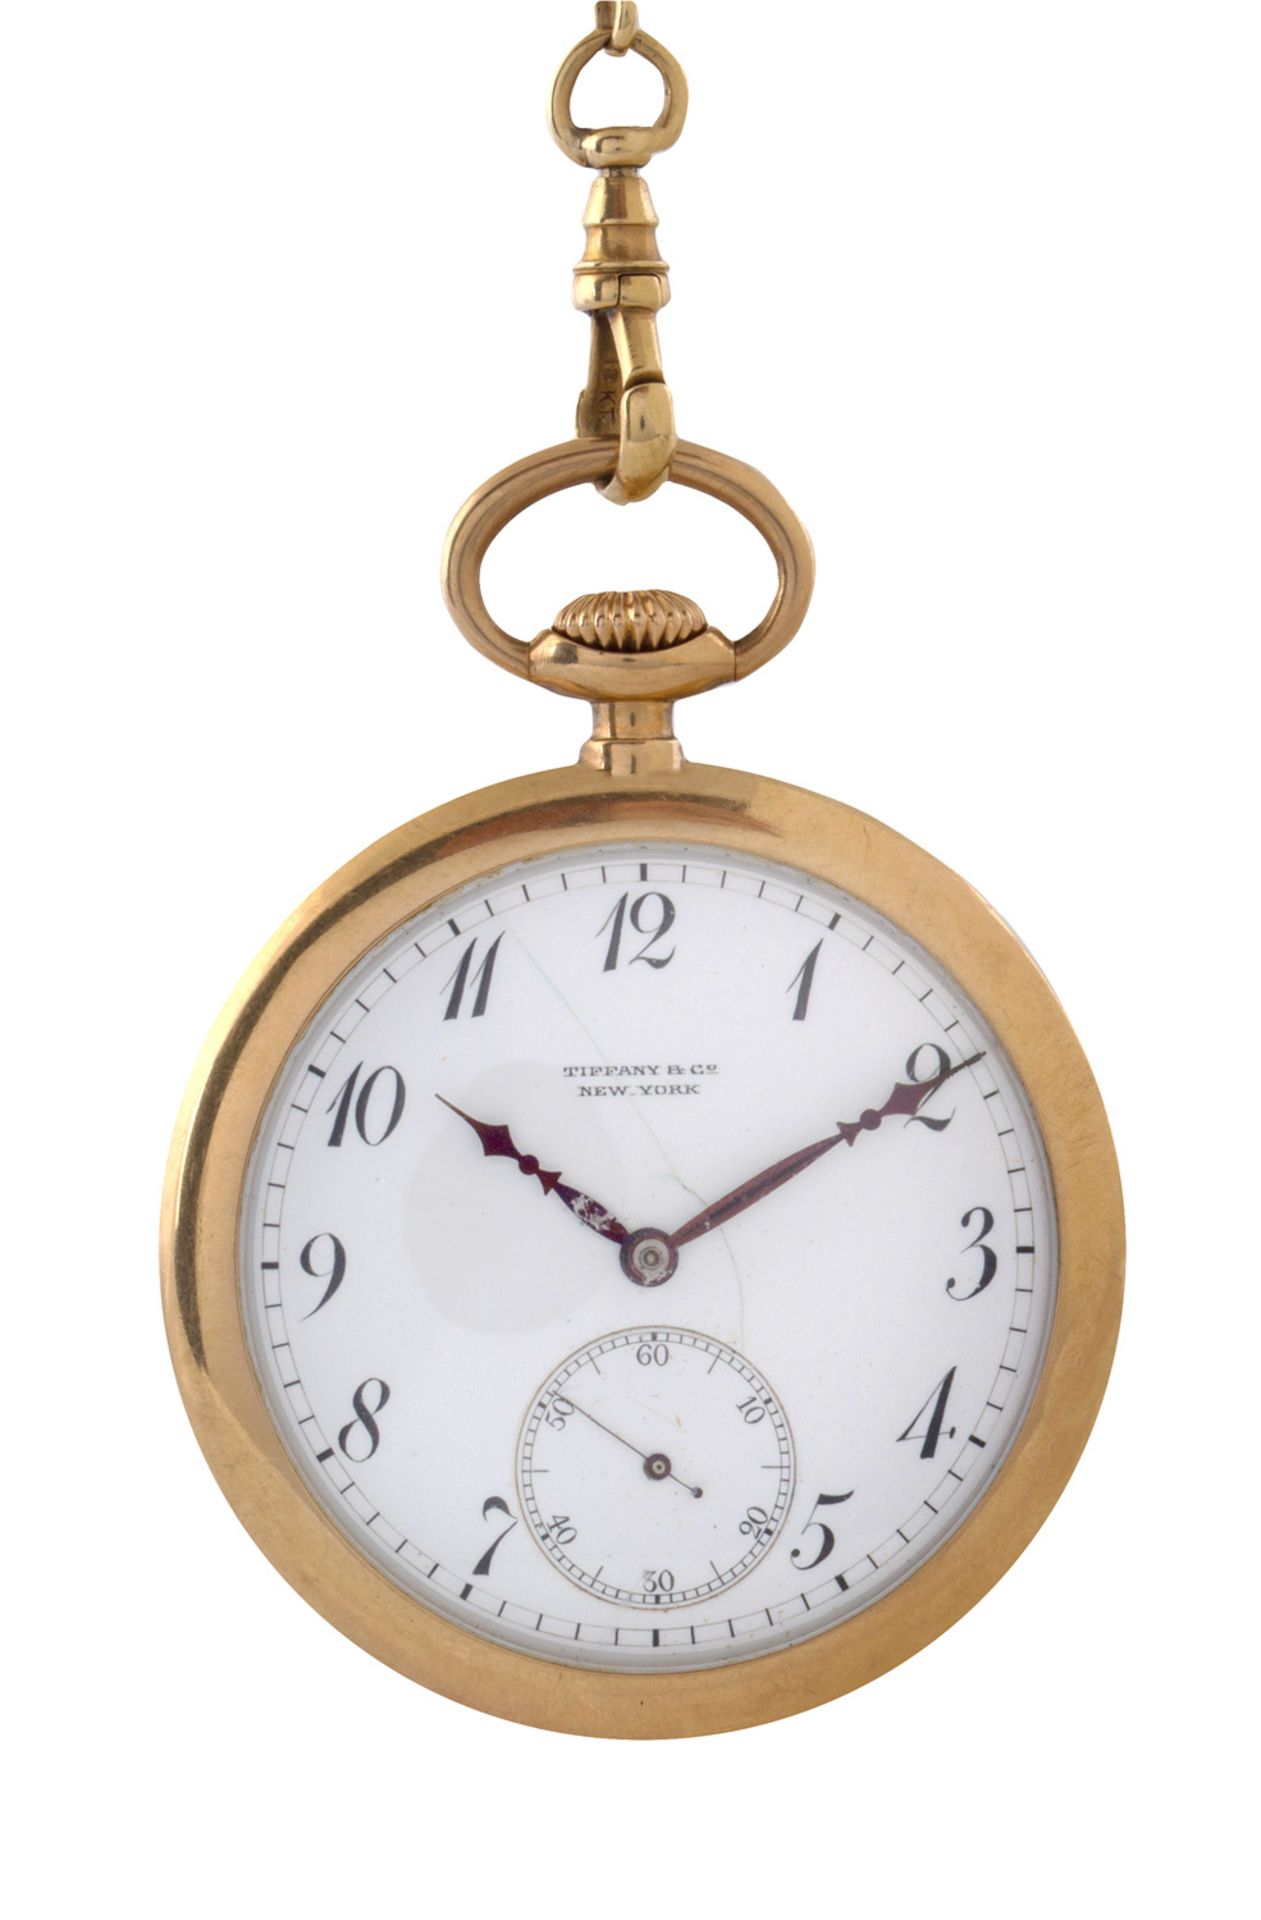 A TIFFANY & CO. 18K YELLOW GOLD POCKET WATCH WITH GOLD CHAIN, CASE NO. 19586 - Bild 2 aus 5